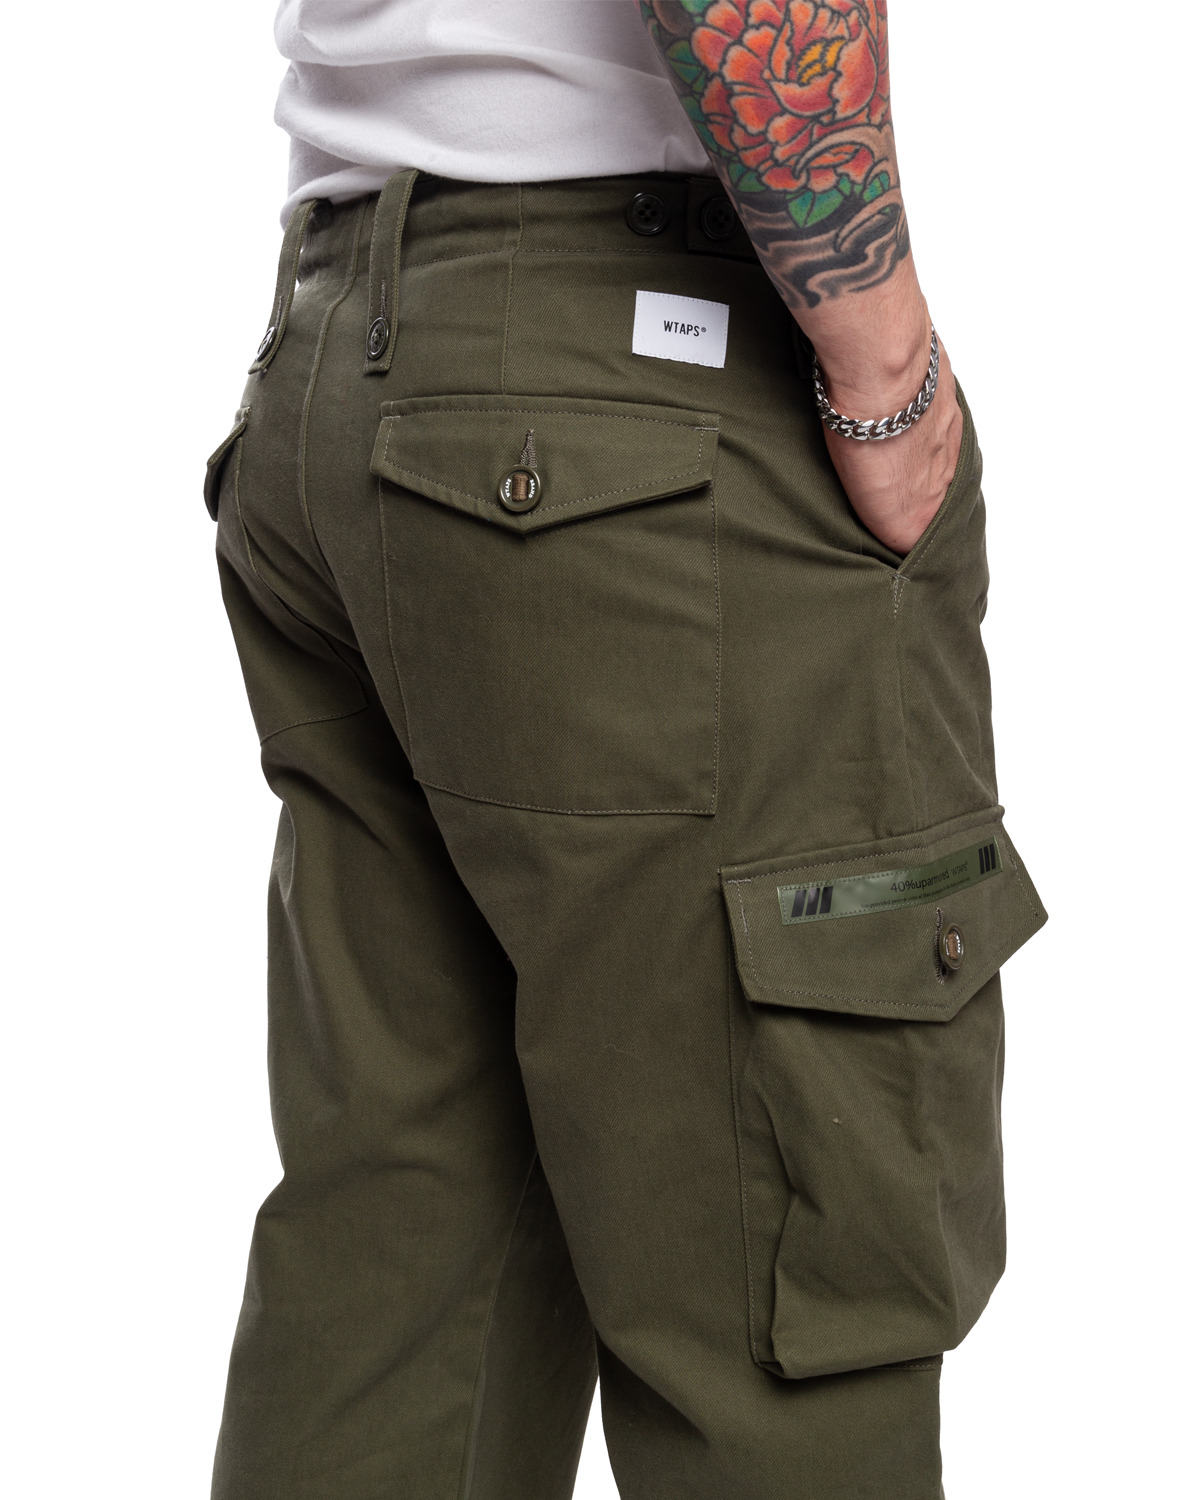 MILT2001/Trousers/Cotton. Twill Olive Drab - 5